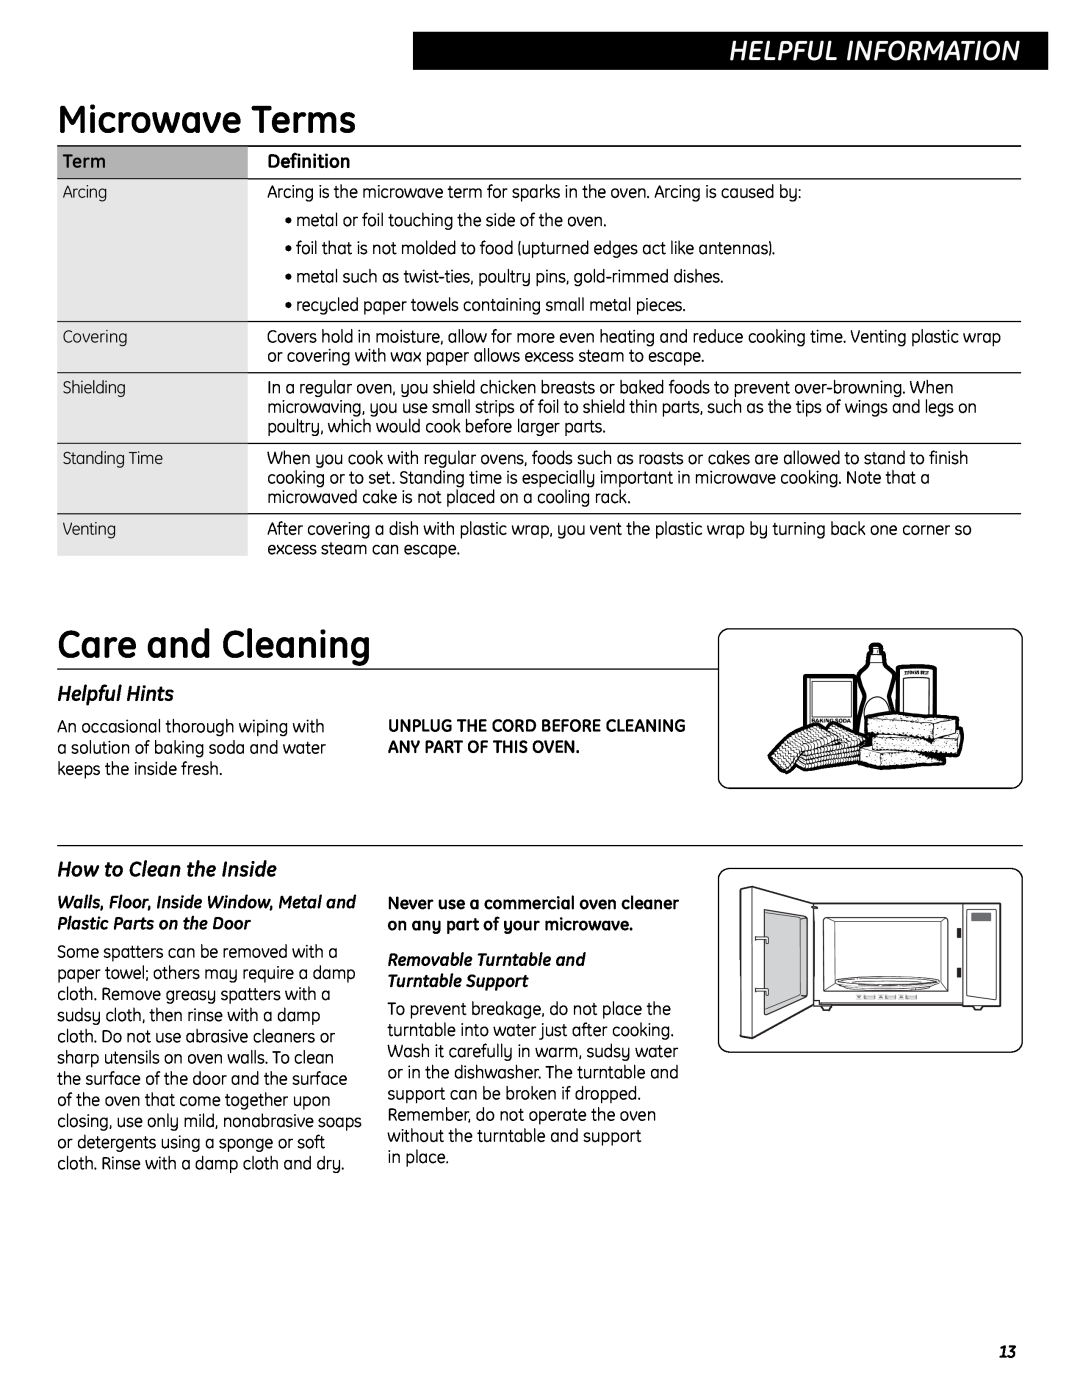 GE WES0930 Microwave Terms, Care and Cleaning, Helpful Information, Helpful Hints, How to Clean the Inside, Definition 